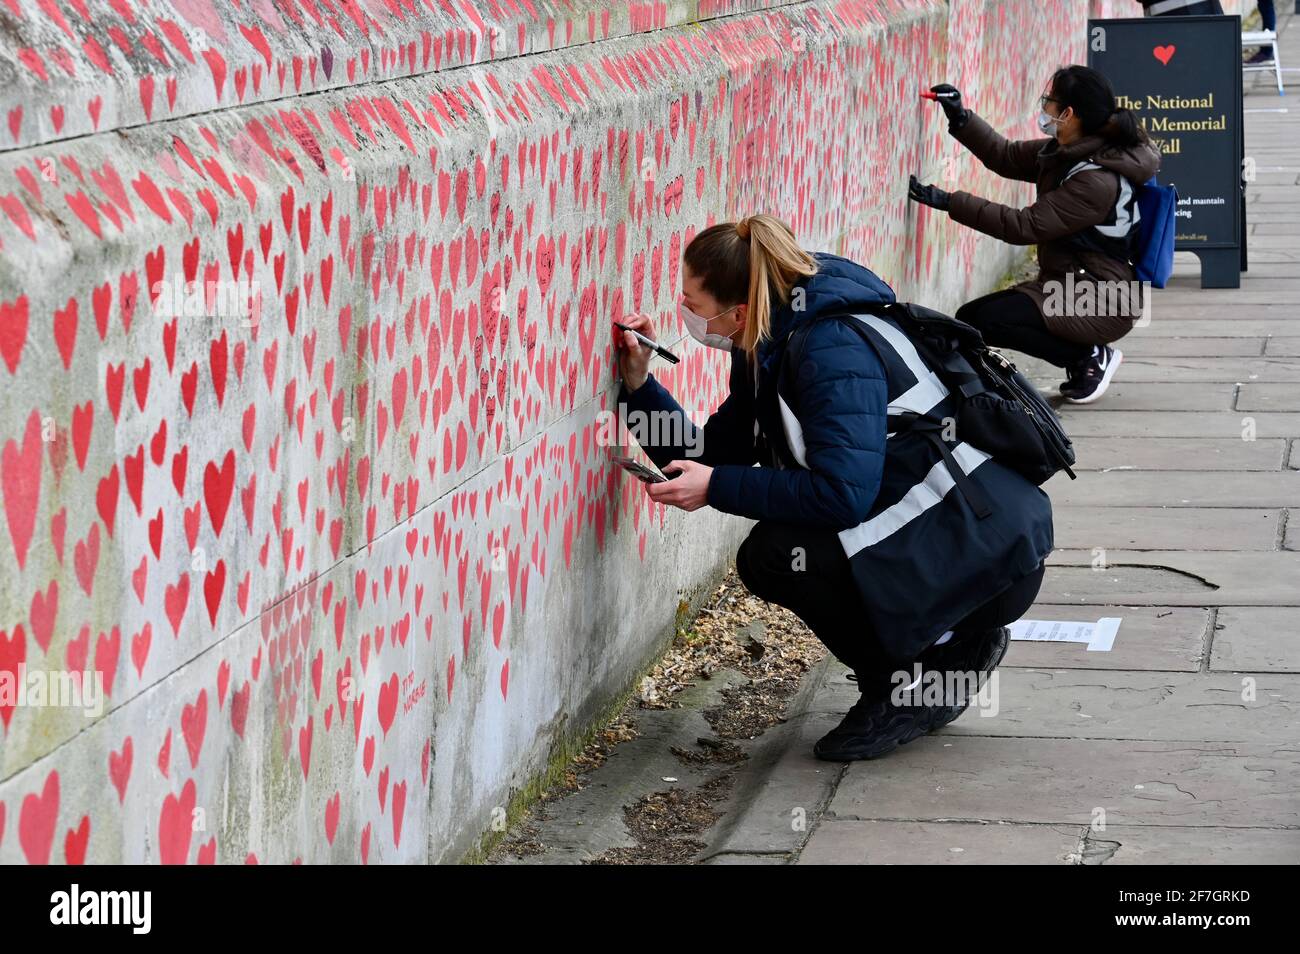 National Covid Memorial Wall, Around 130,000 hearts have been painted on a kilometre long section of wall opposite the Houses of Parliament as a memorial to those who have died from Coronavirus. St Thomas' Hospital, Westminster, London. UK Stock Photo